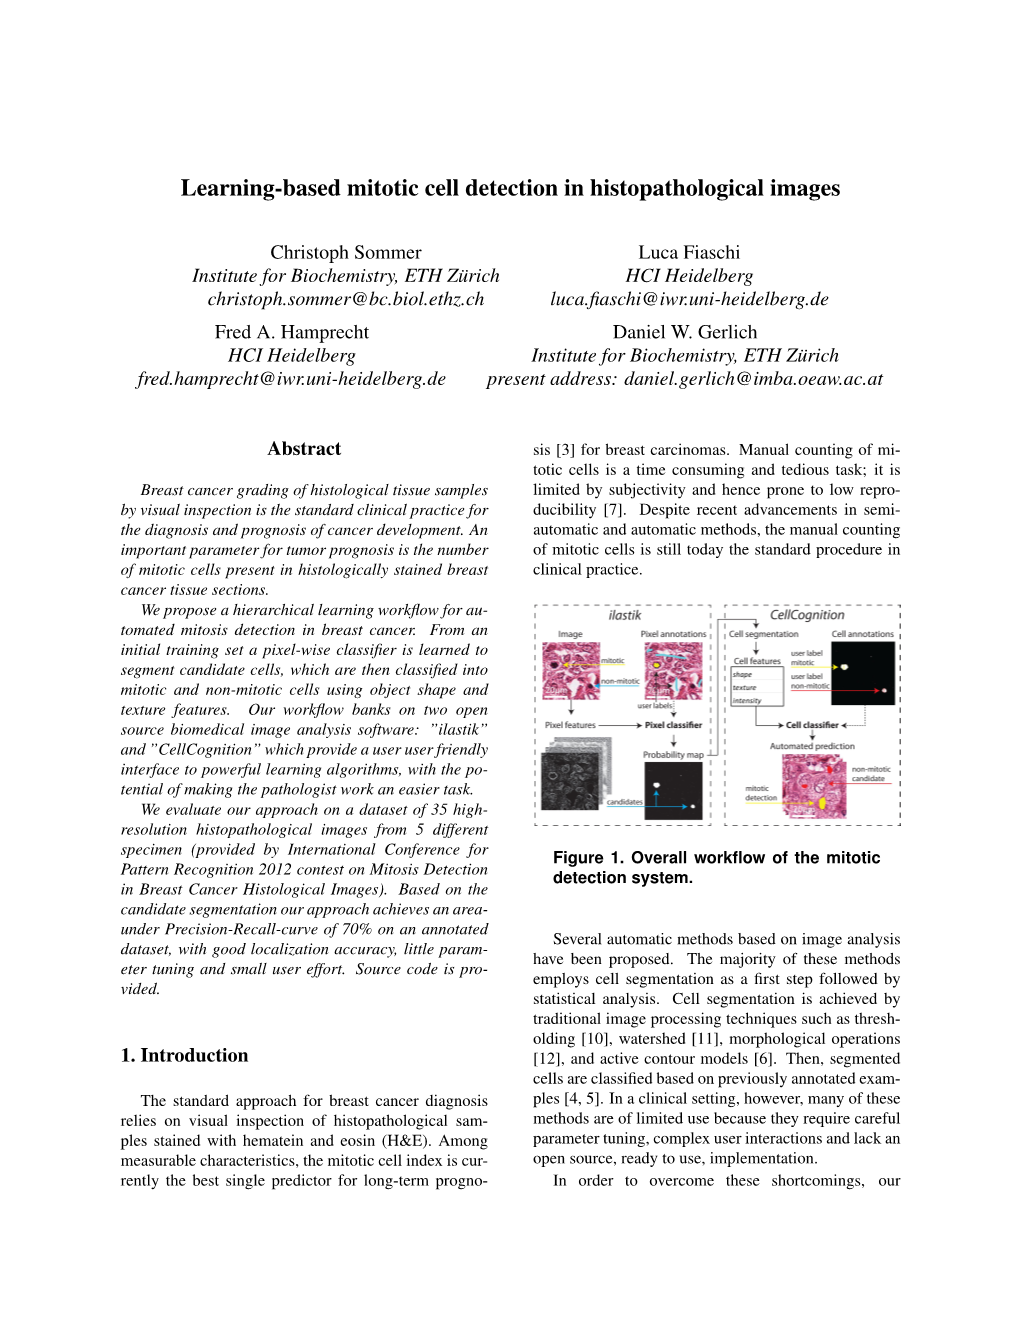 Learning-Based Mitotic Cell Detection in Histopathological Images